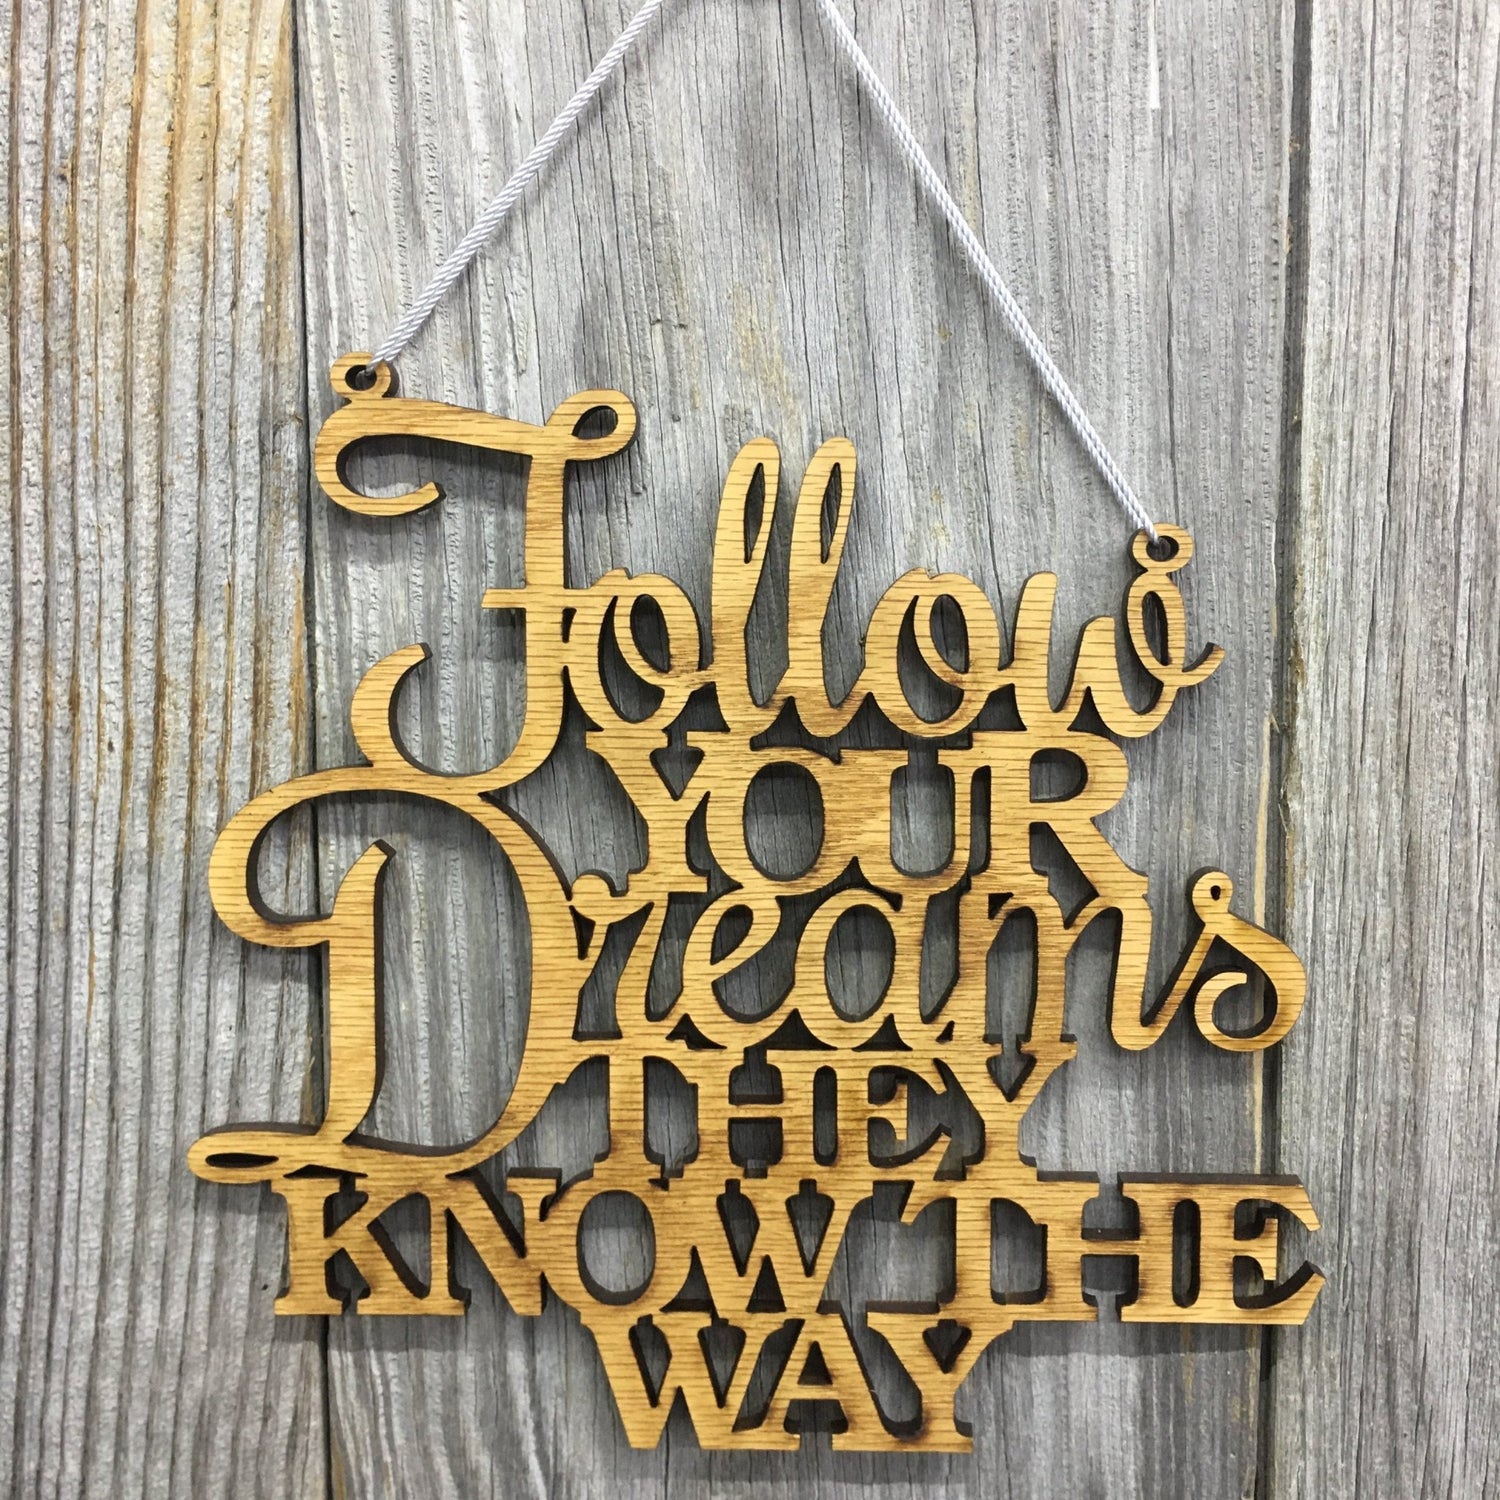 Custom Sign Wall Decor - Custom Sign Wall Decor - Follow Your Dreams Sign Wall Decor - Legacy Images - Legacy Images - Novelty Signs - Legacy Images - Novelty Signs